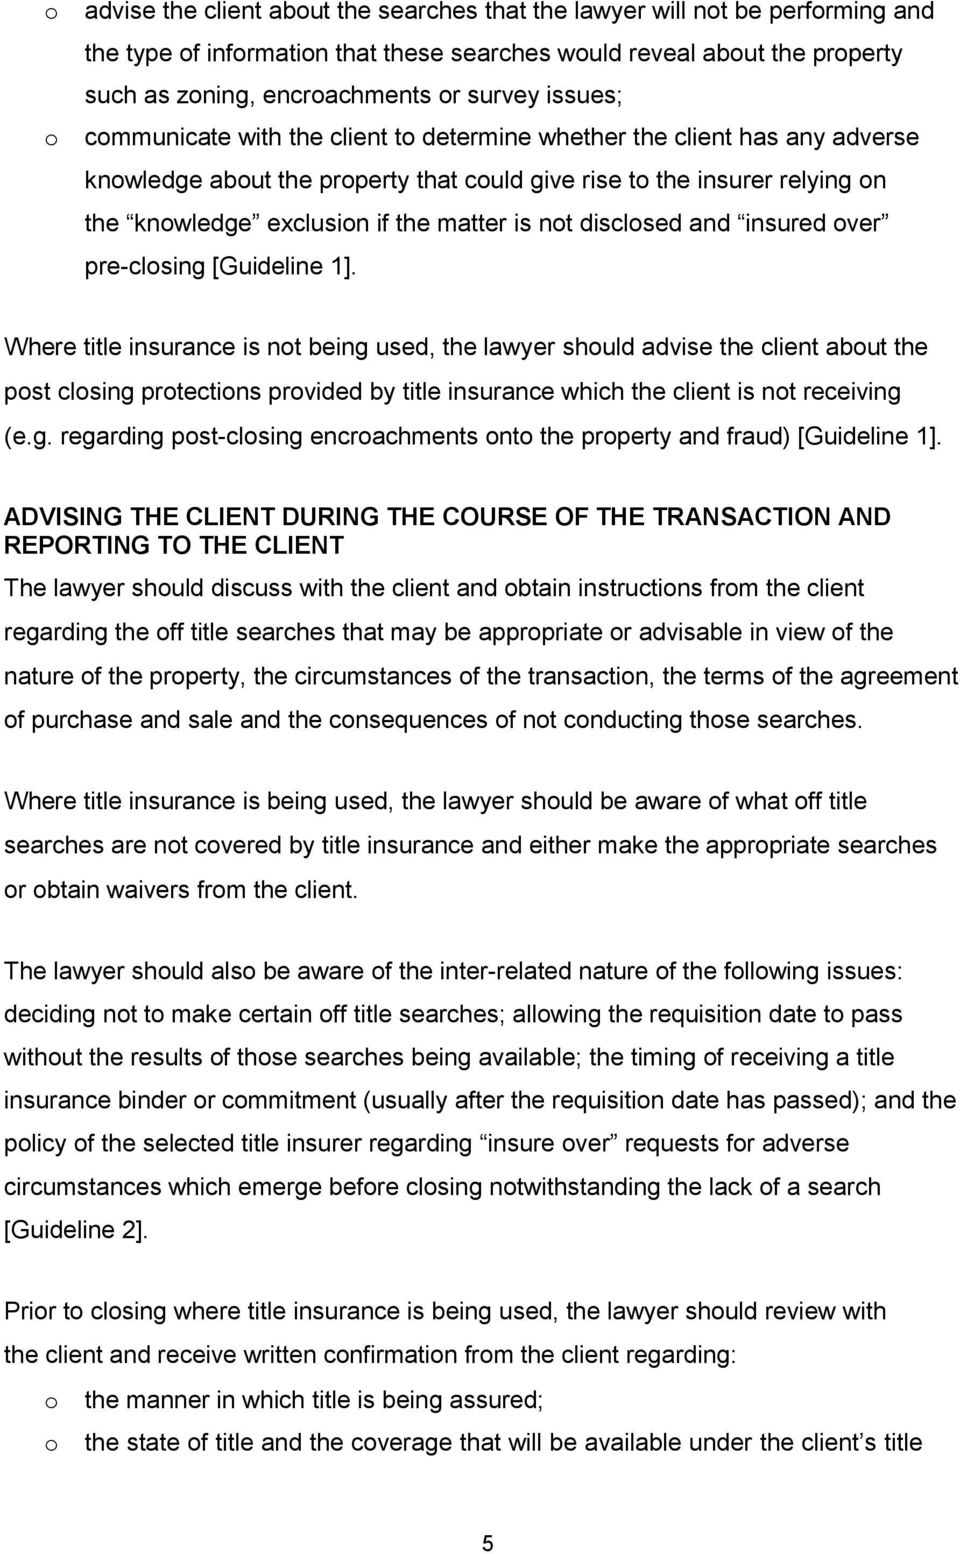 is not disclosed and insured over pre-closing [Guideline 1].